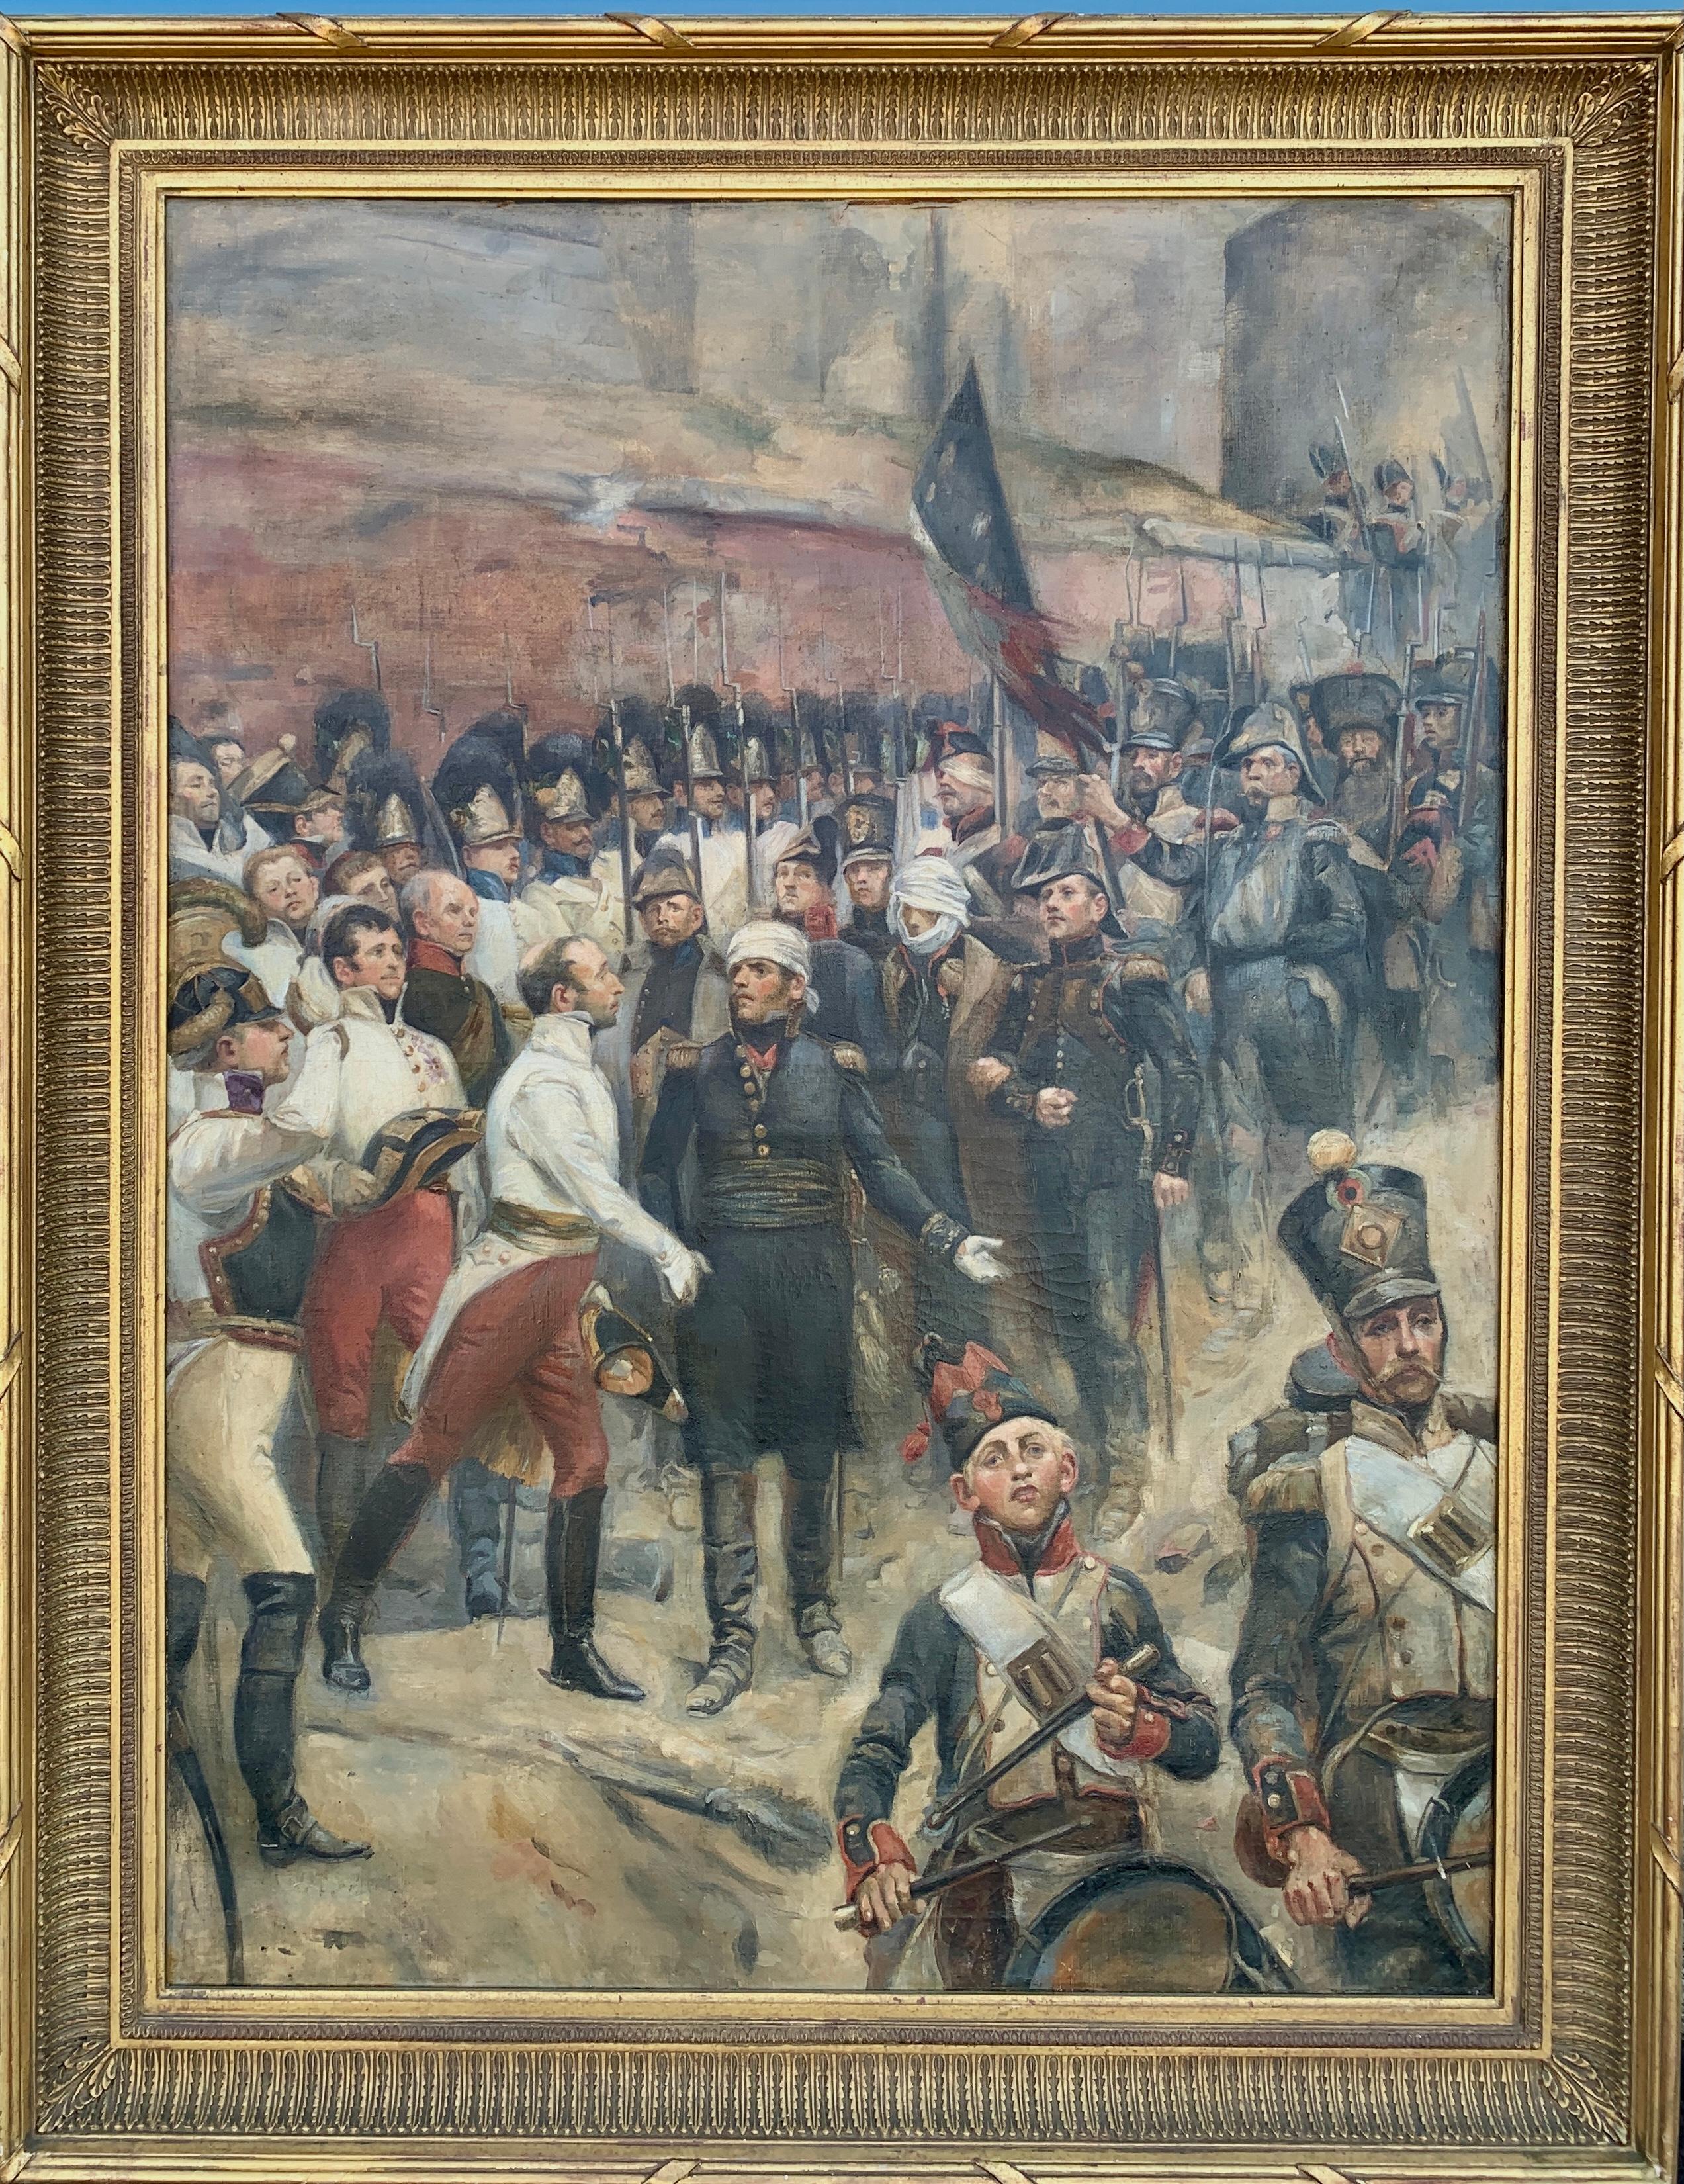 19th century French, Surrender of the French at Huningen Fort to the Austrians